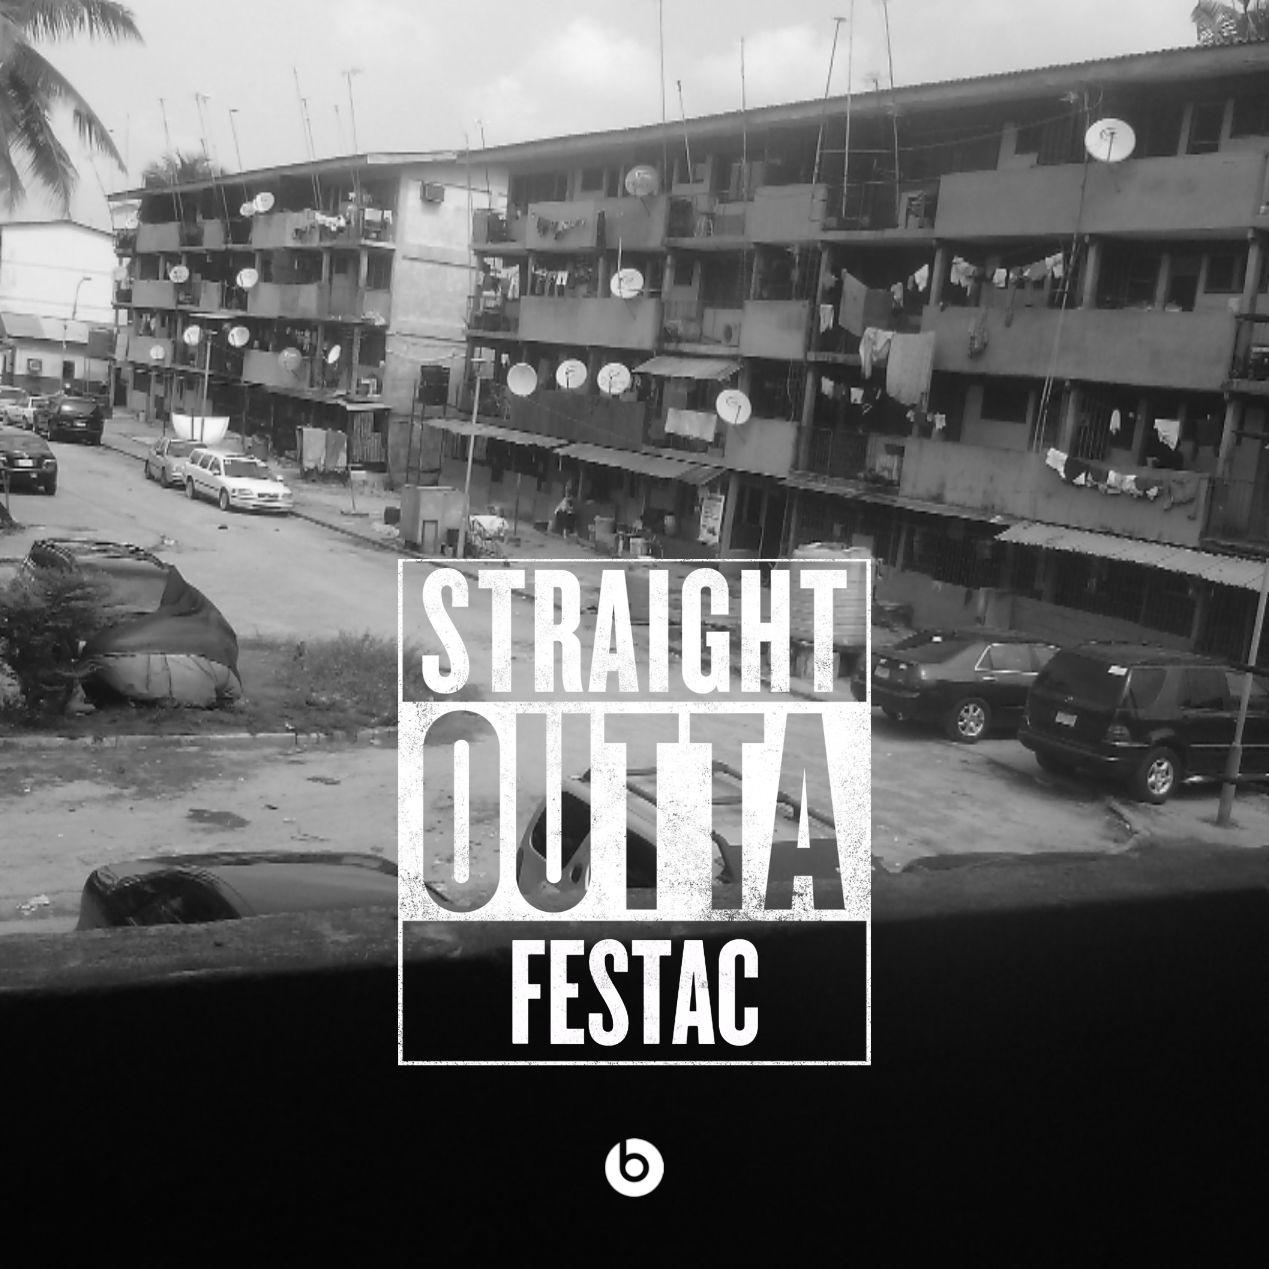 Get information straight about anything in Festac..get connected